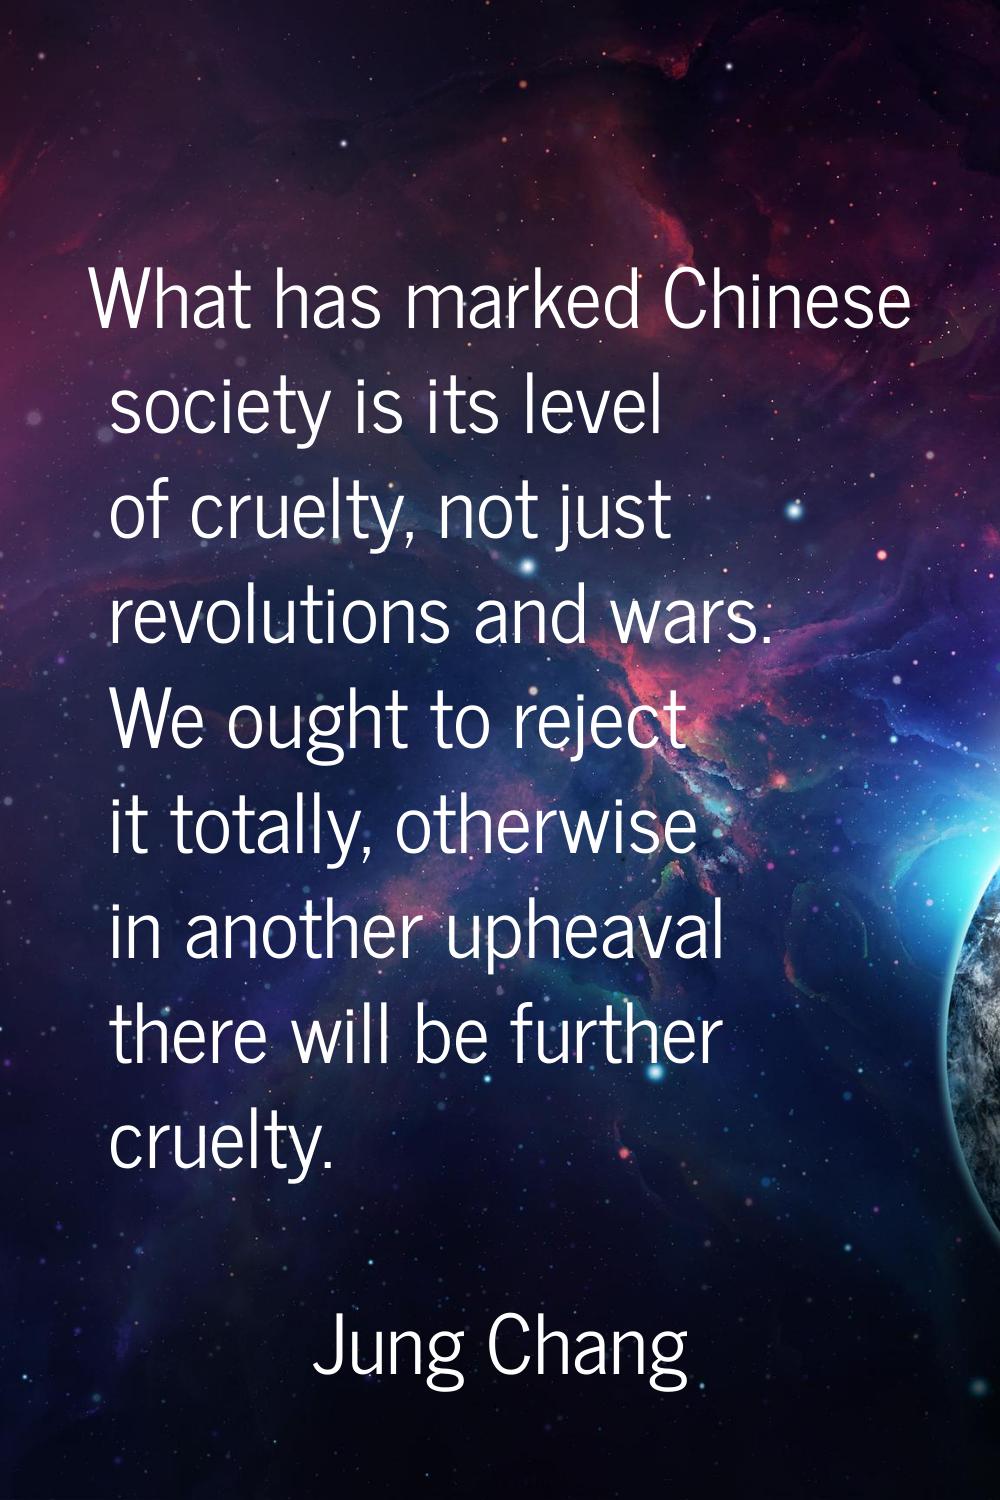 What has marked Chinese society is its level of cruelty, not just revolutions and wars. We ought to